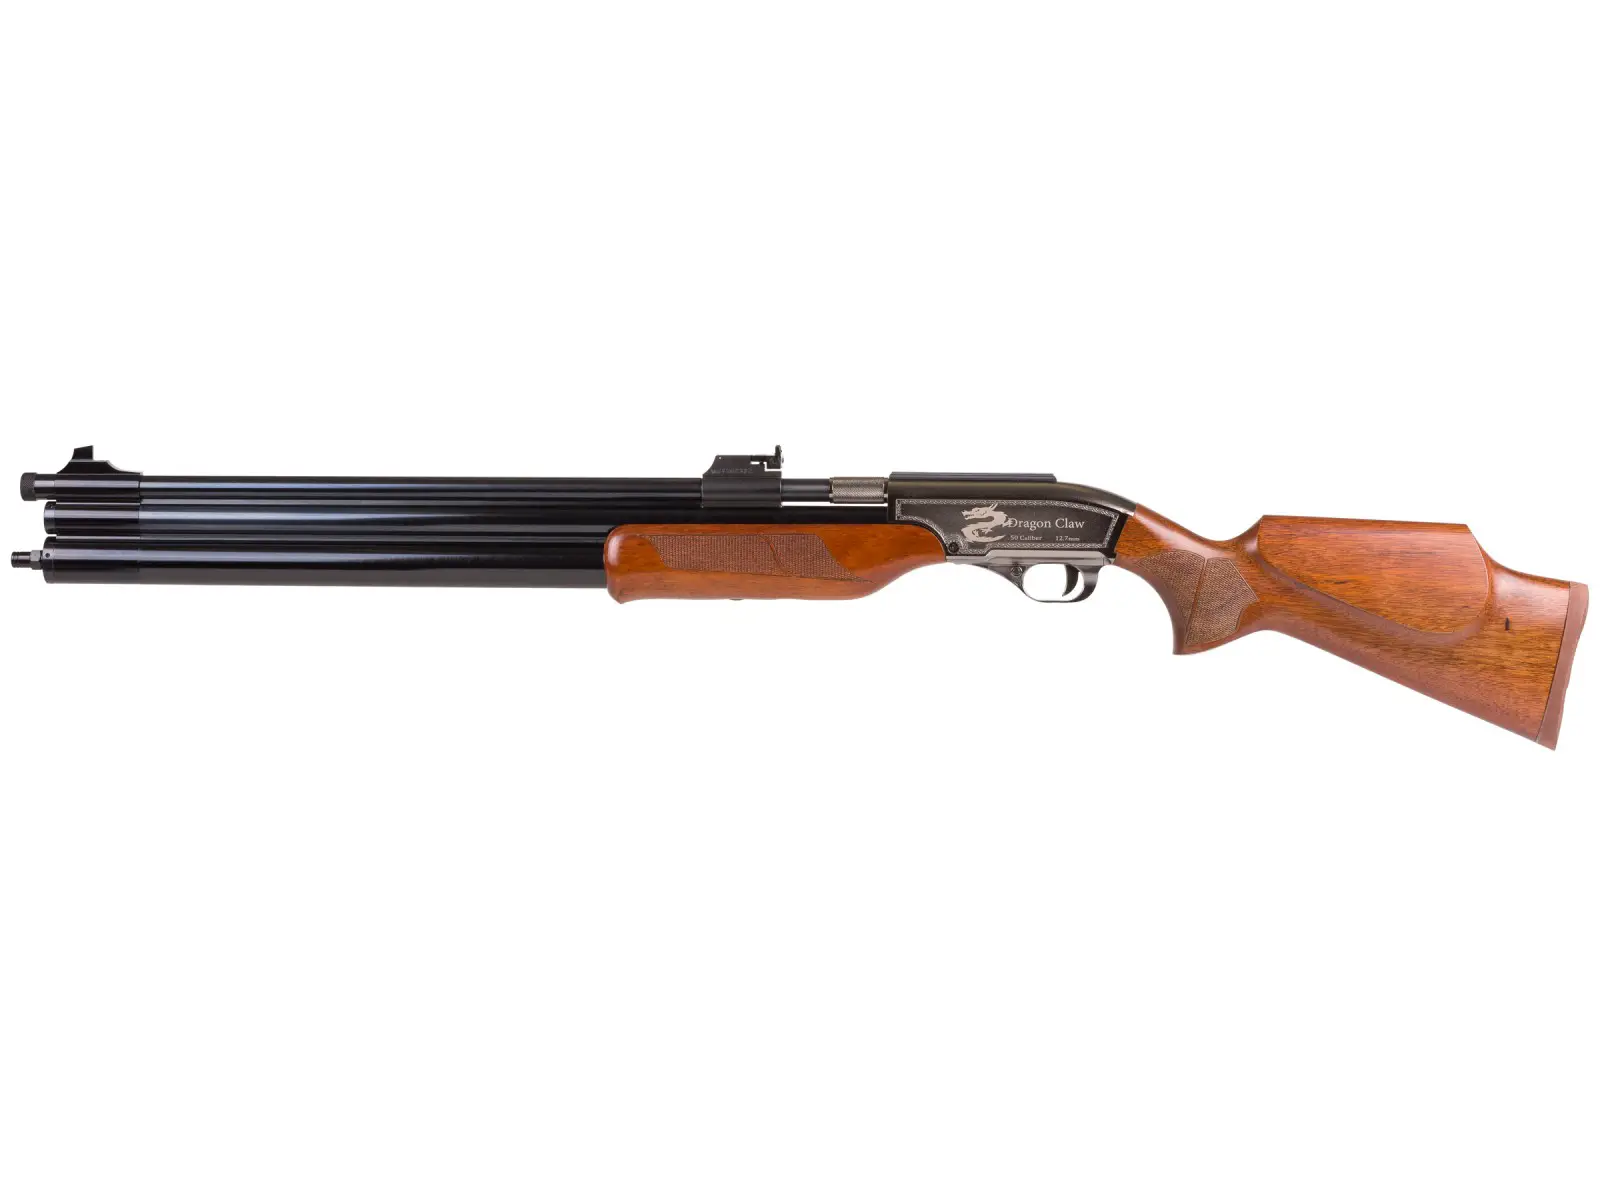 s113 Best .50 Caliber Air Rifles - Top 5 Hard-hitting Pellet Guns for Big Games (Reviews and Buying Guide 2023)